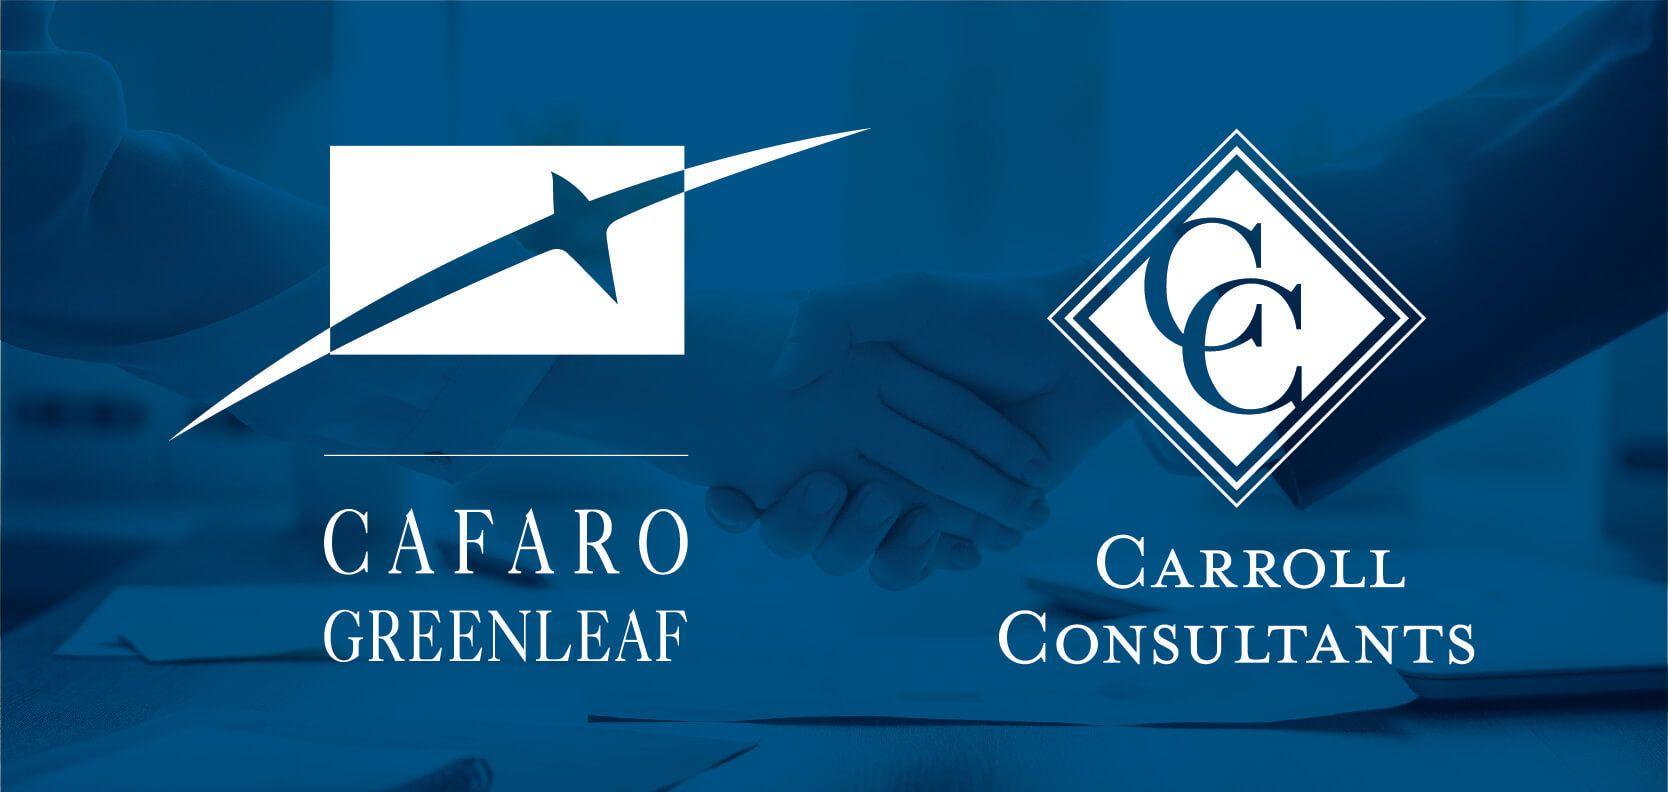 Blue and Green Leaf Logo - Cafaro Greenleaf Expands Footprint with Merger of Carroll